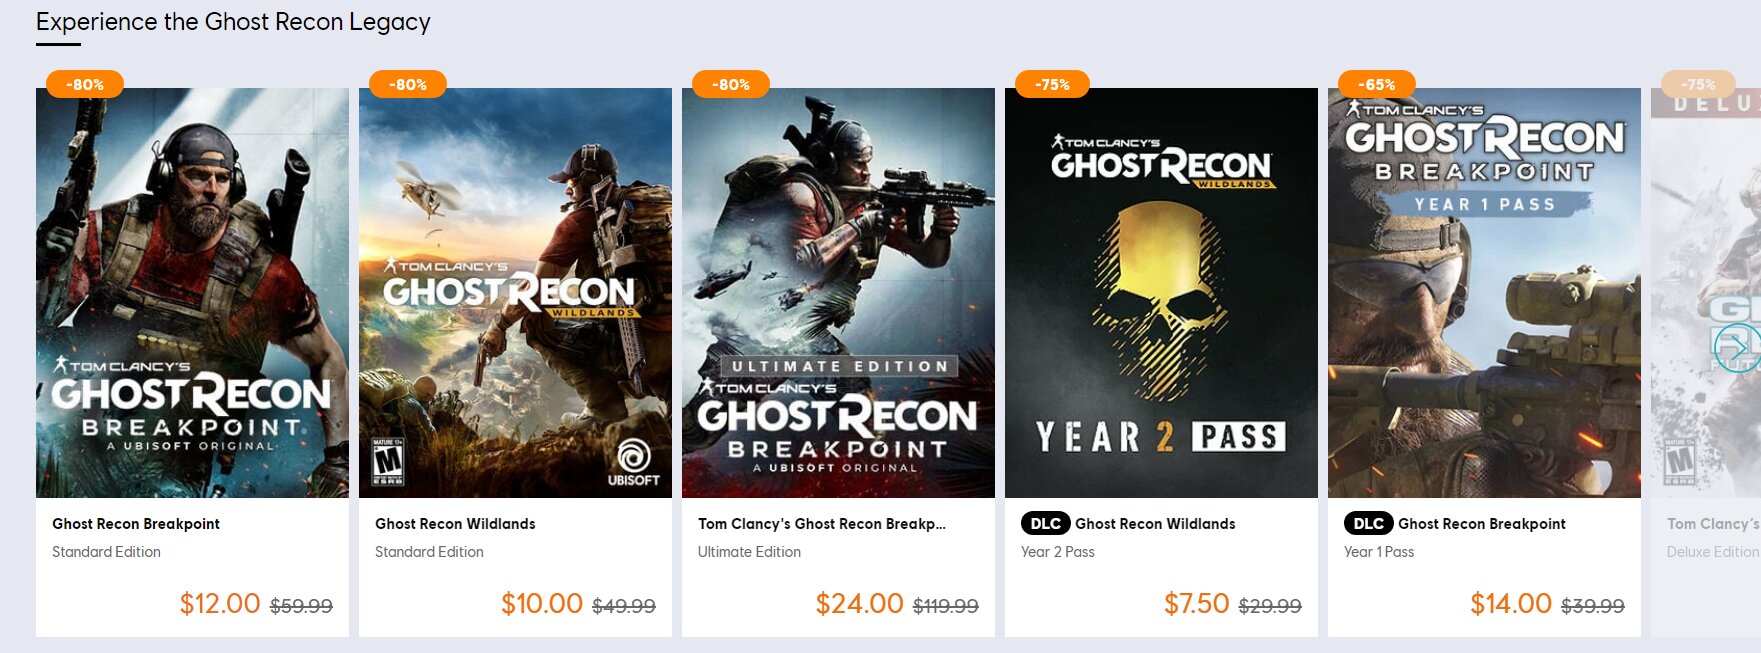 Ghost Recon Titles on Sale